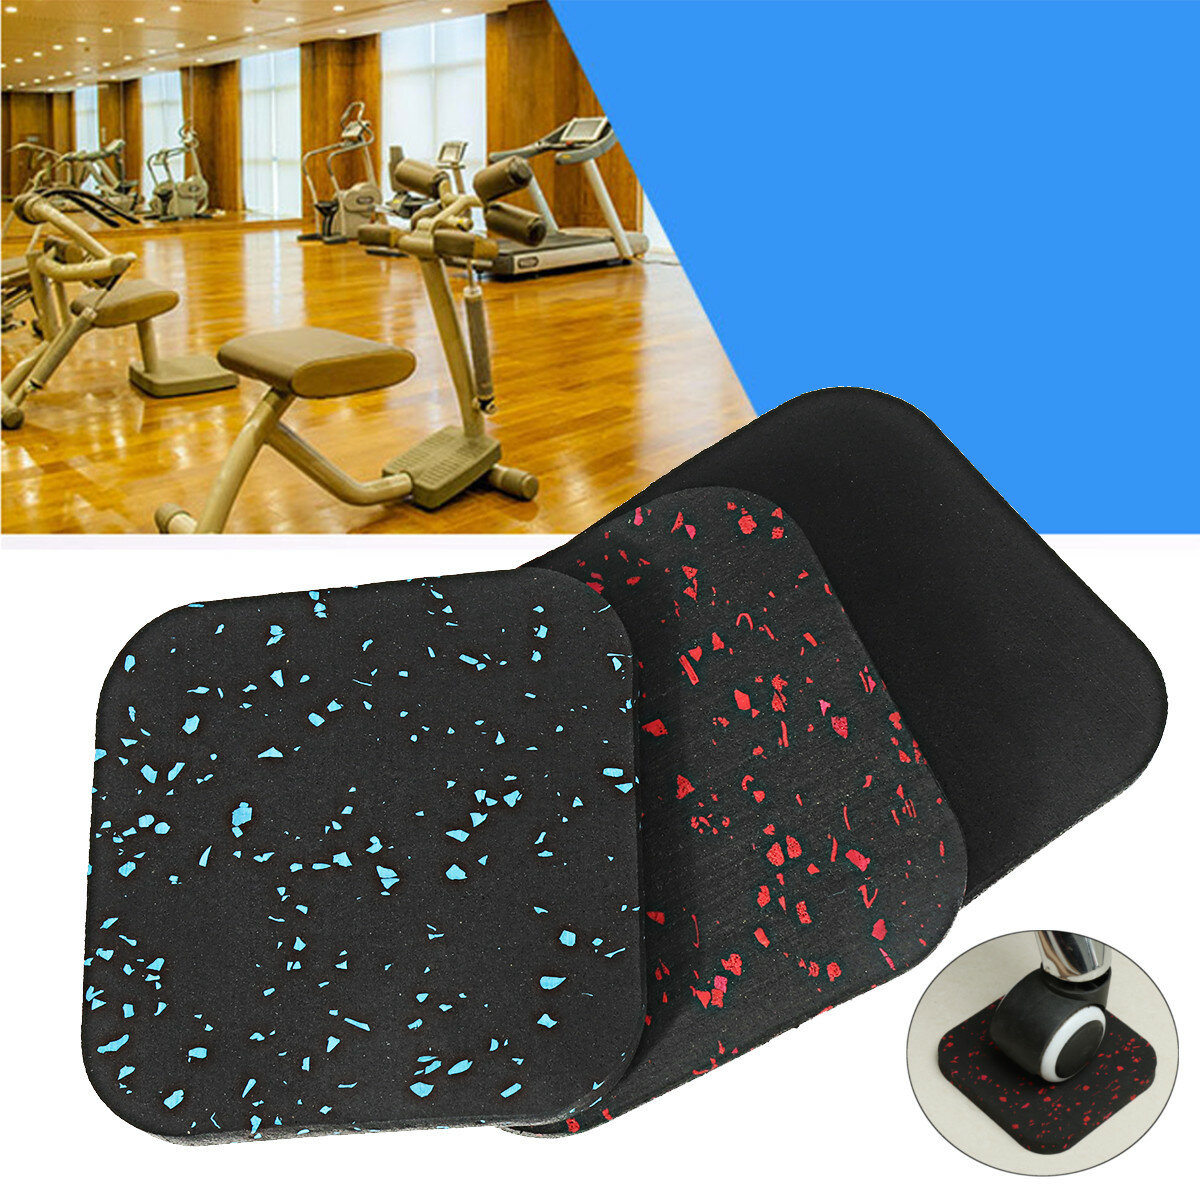 10010010mm Thick Color Dot Rubber Treadmill Cushion Furniture Foot Mat For Gym